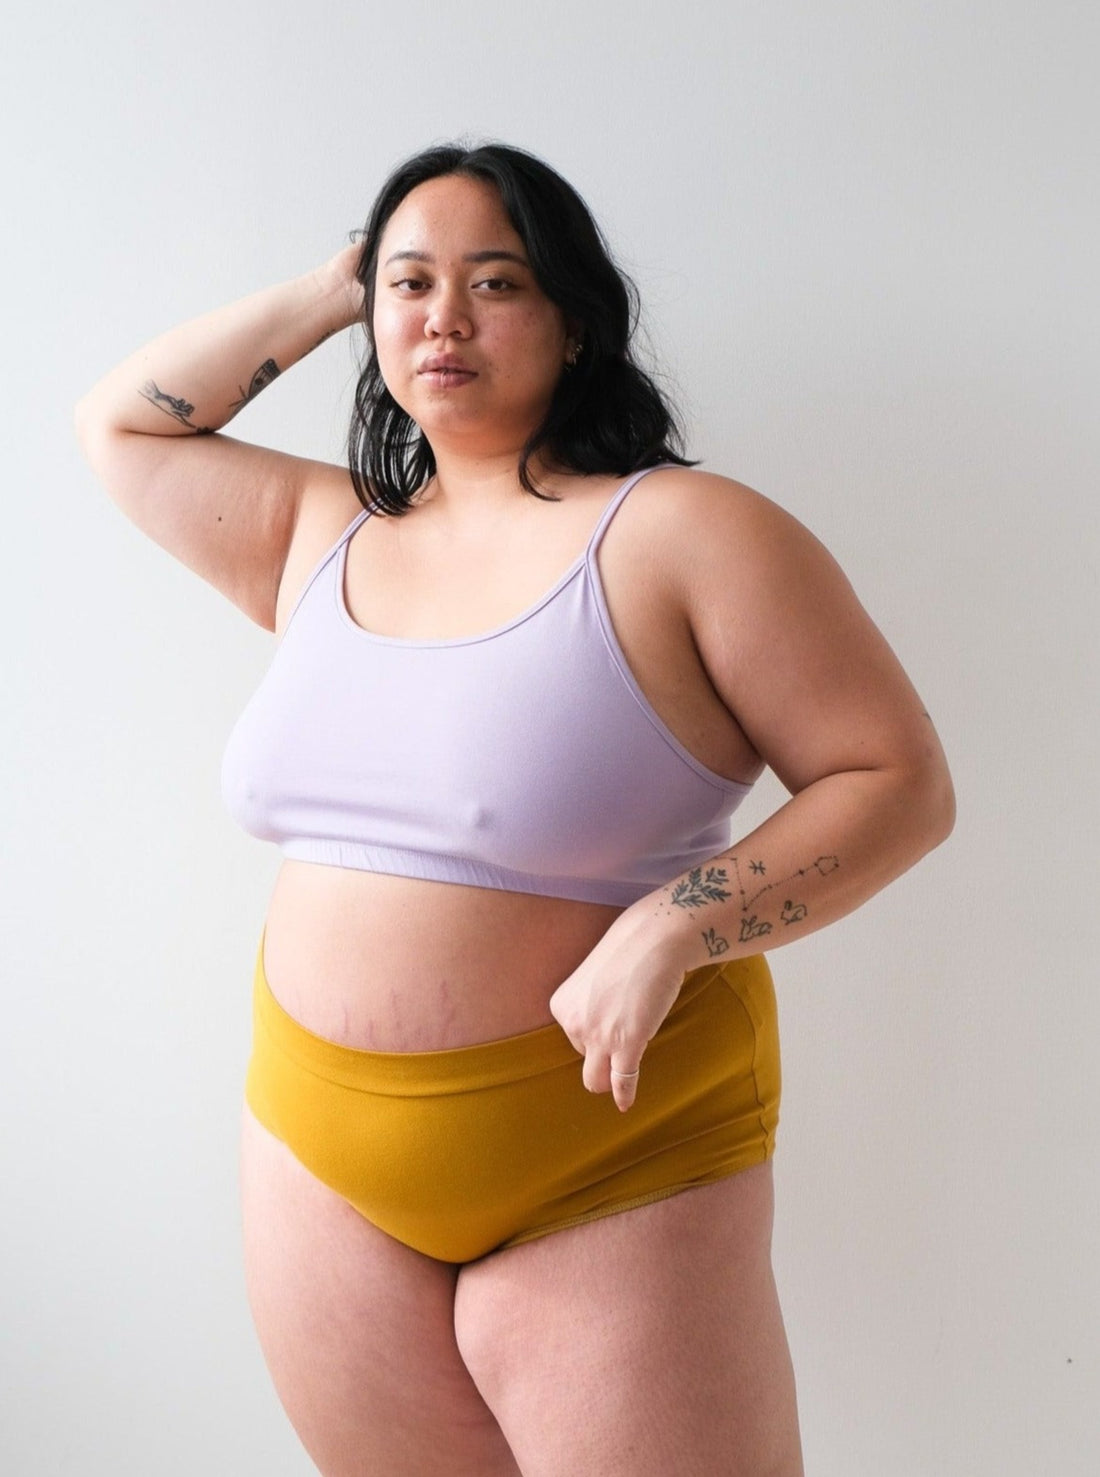 Why you should invest in beautiful maternity lingerie - by Sera